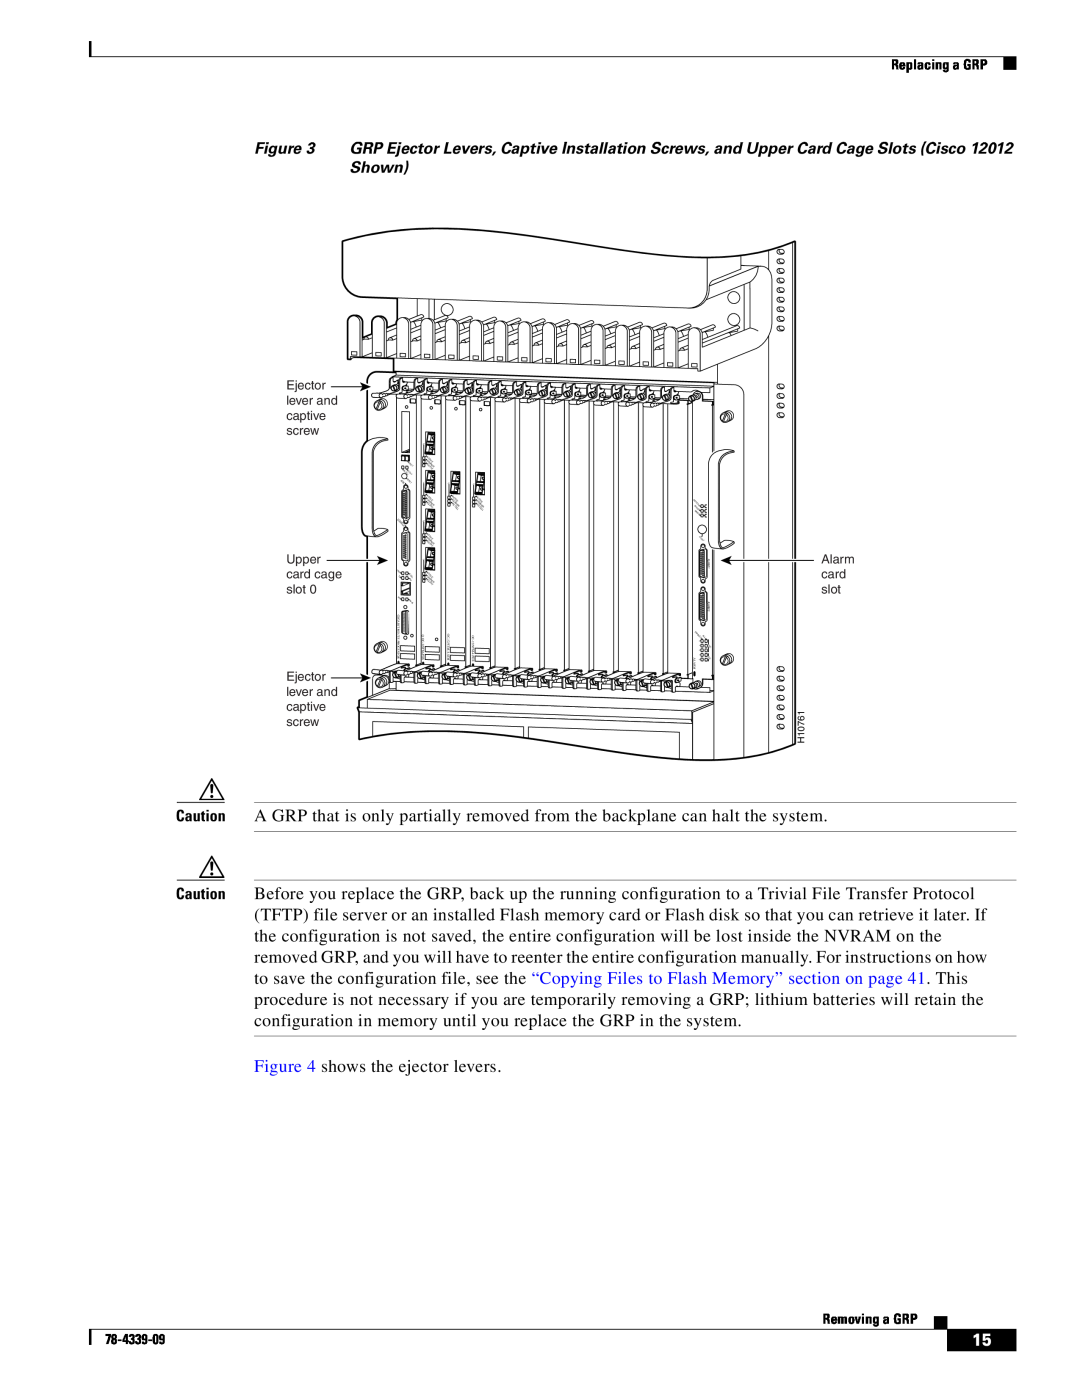 Cisco Systems GRP-B manual shows the ejector levers 